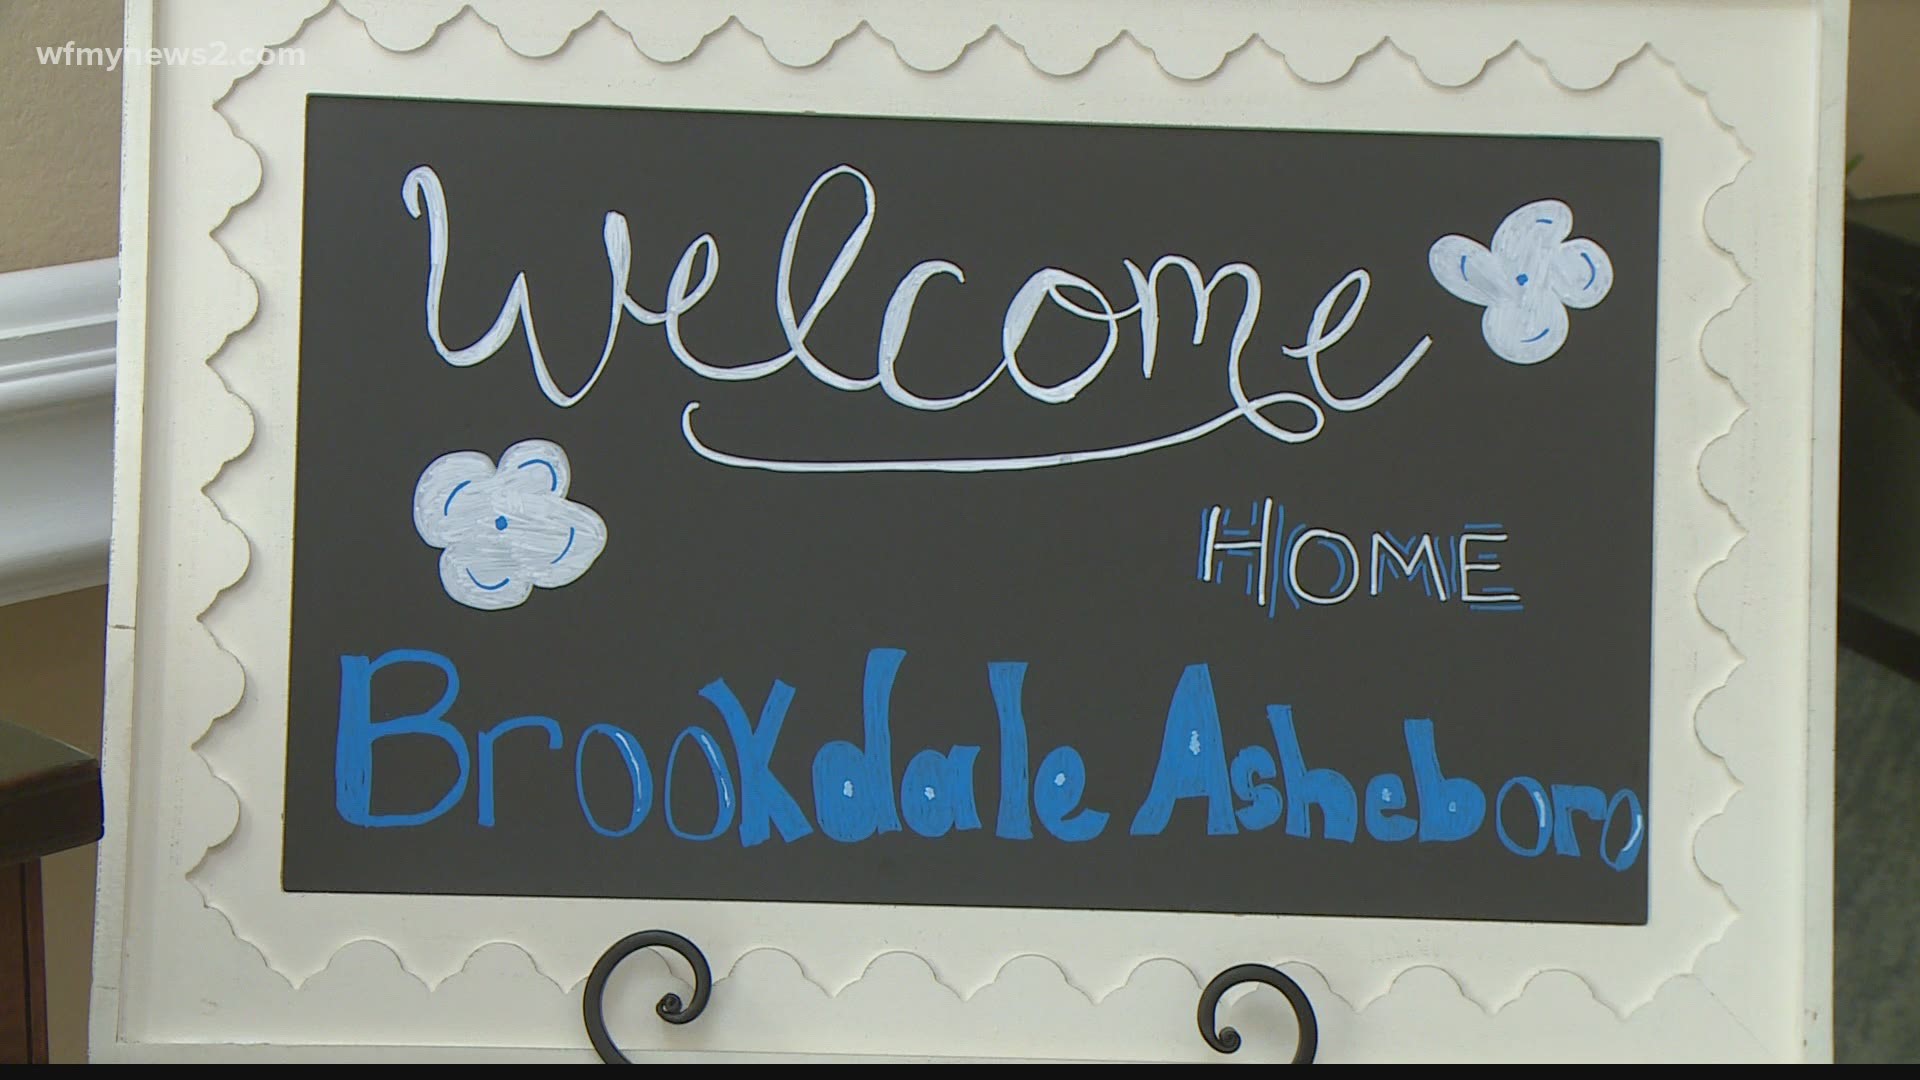 Brookdale Senior Living says they've been proactive and reactive during the coronavirus pandemic. While some associates have tested positive, no resident ever has.